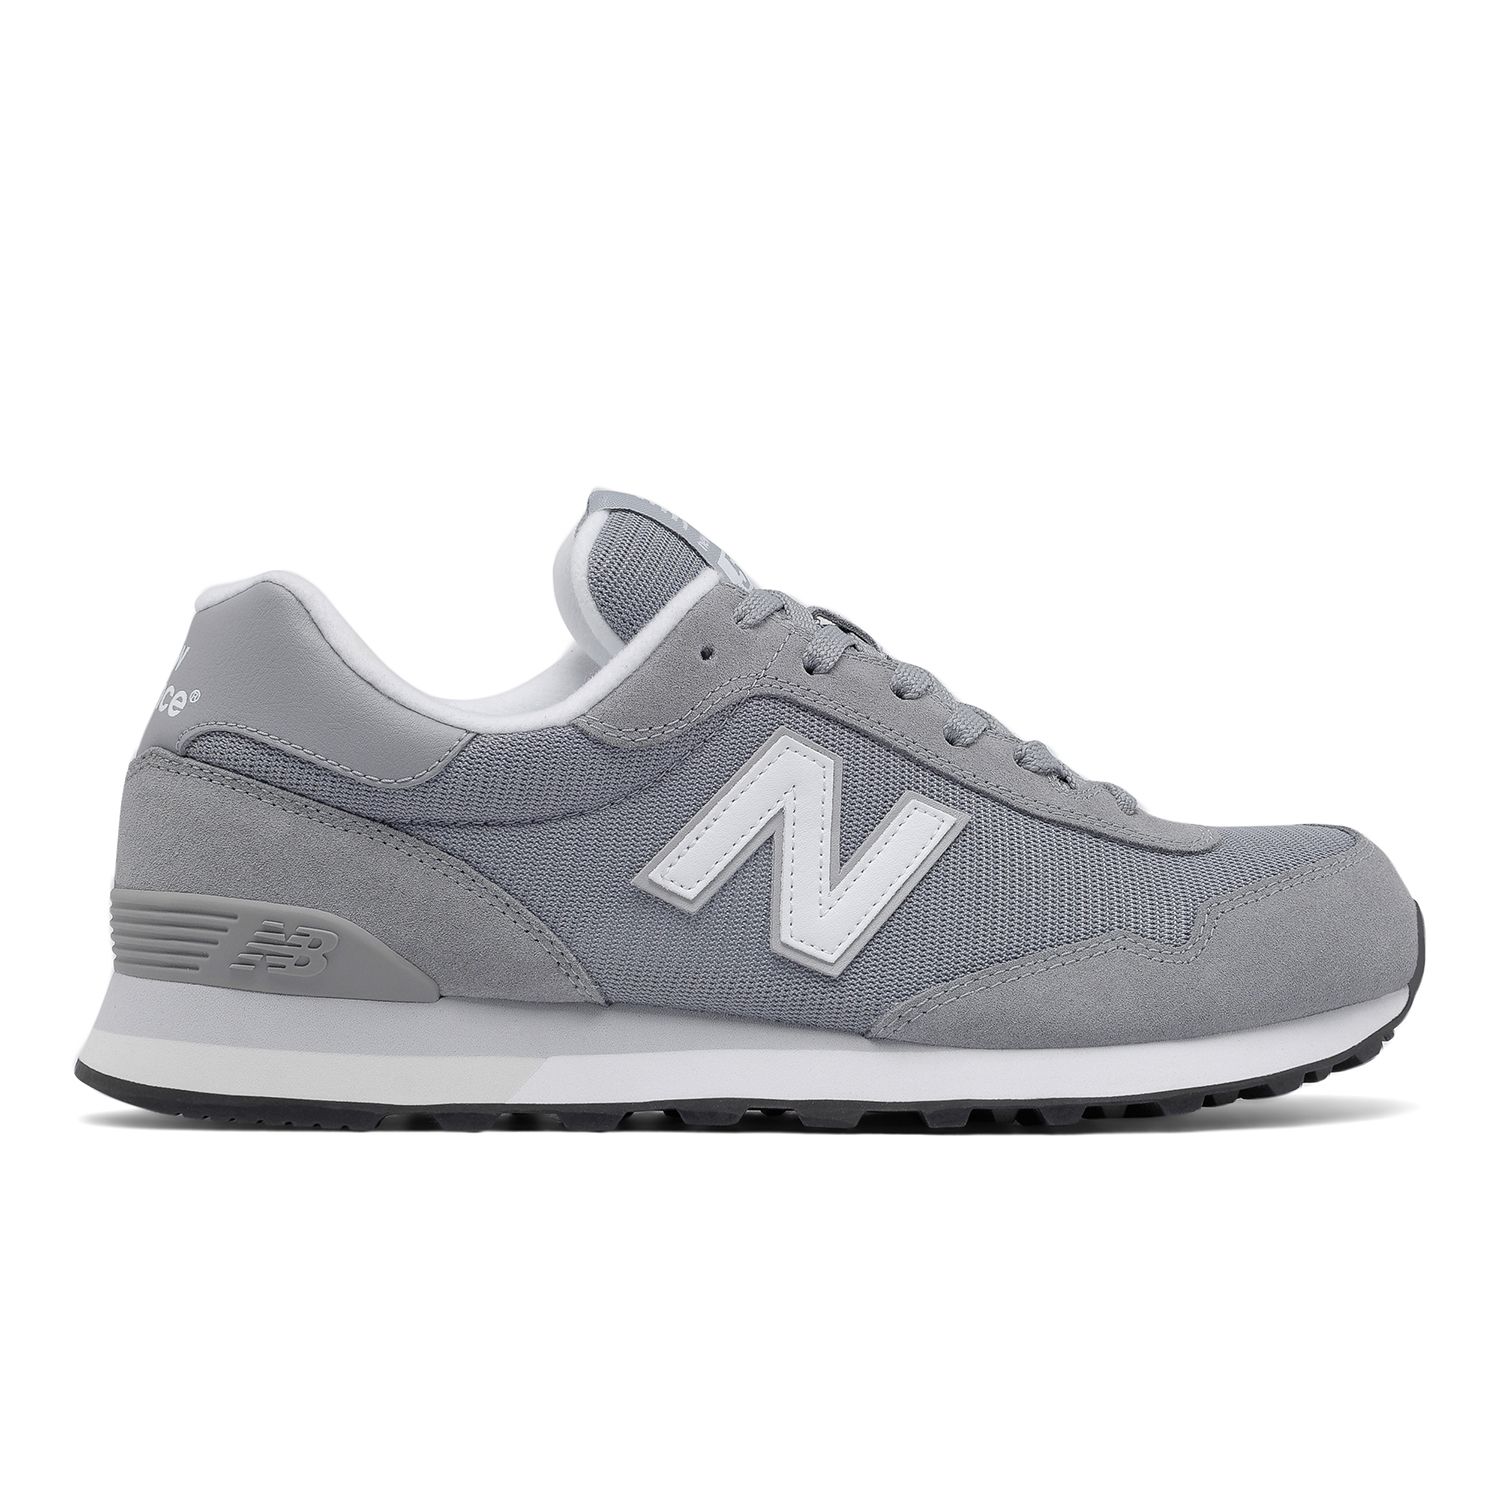 new balance mens shoes on sale